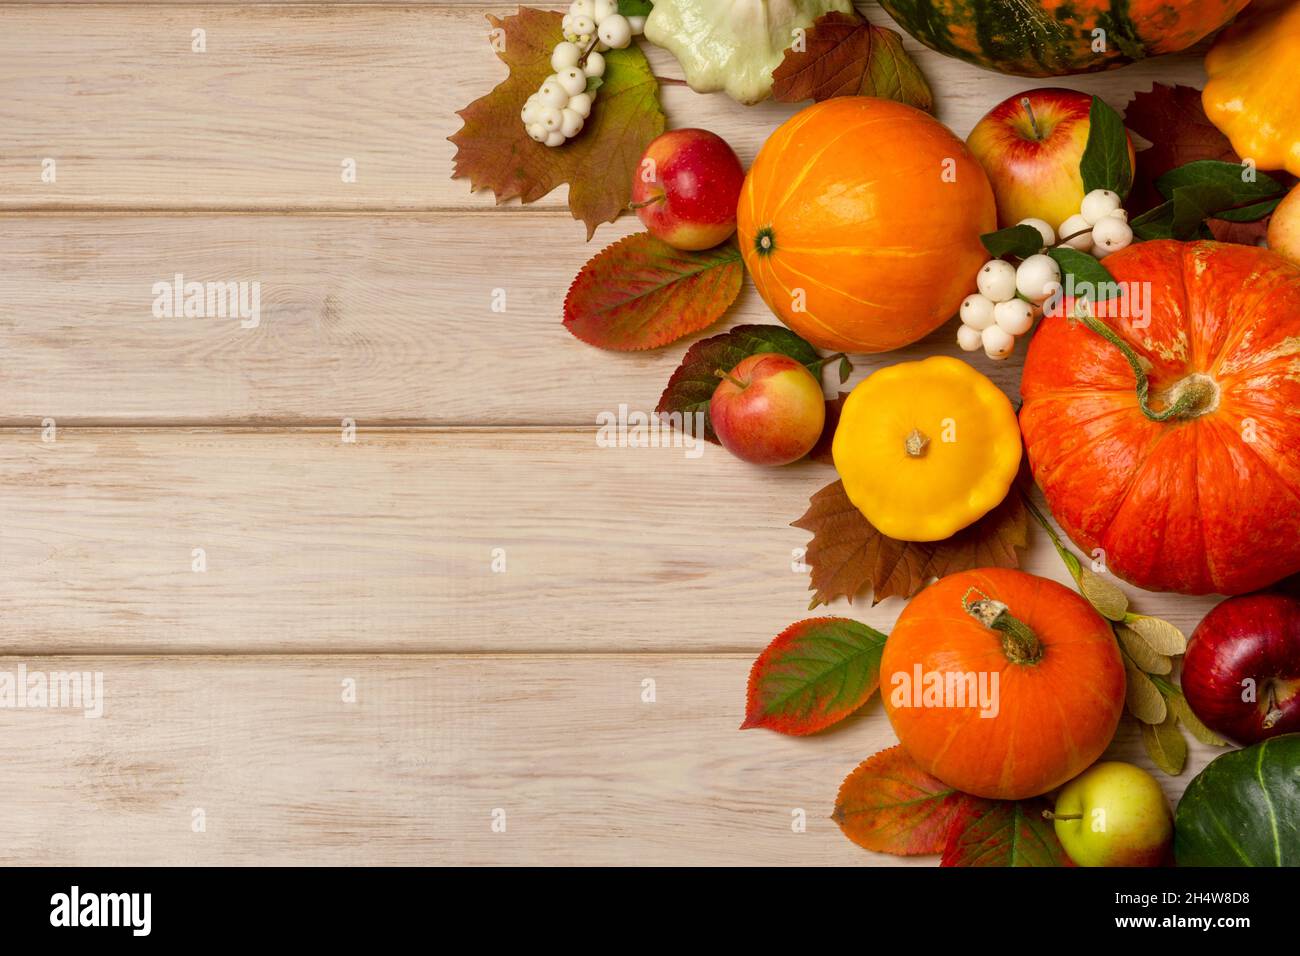 Thanksgiving background with orange pumpkins, snowberry, leaves, yellow squashes on the white wooden table, copy space Stock Photo